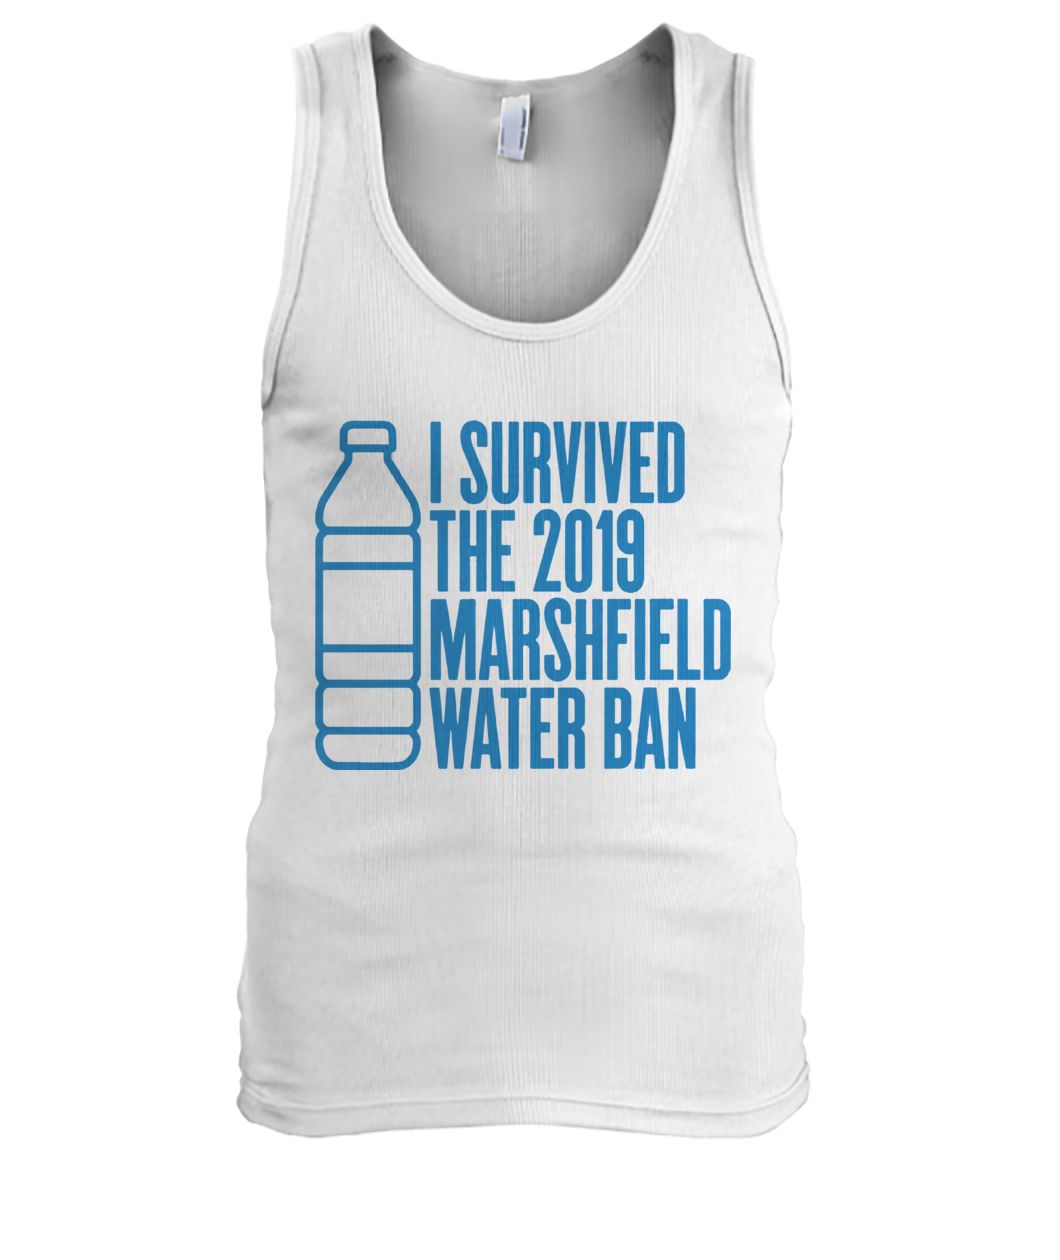 I survived the 2019 marshfield water ban men's tank top